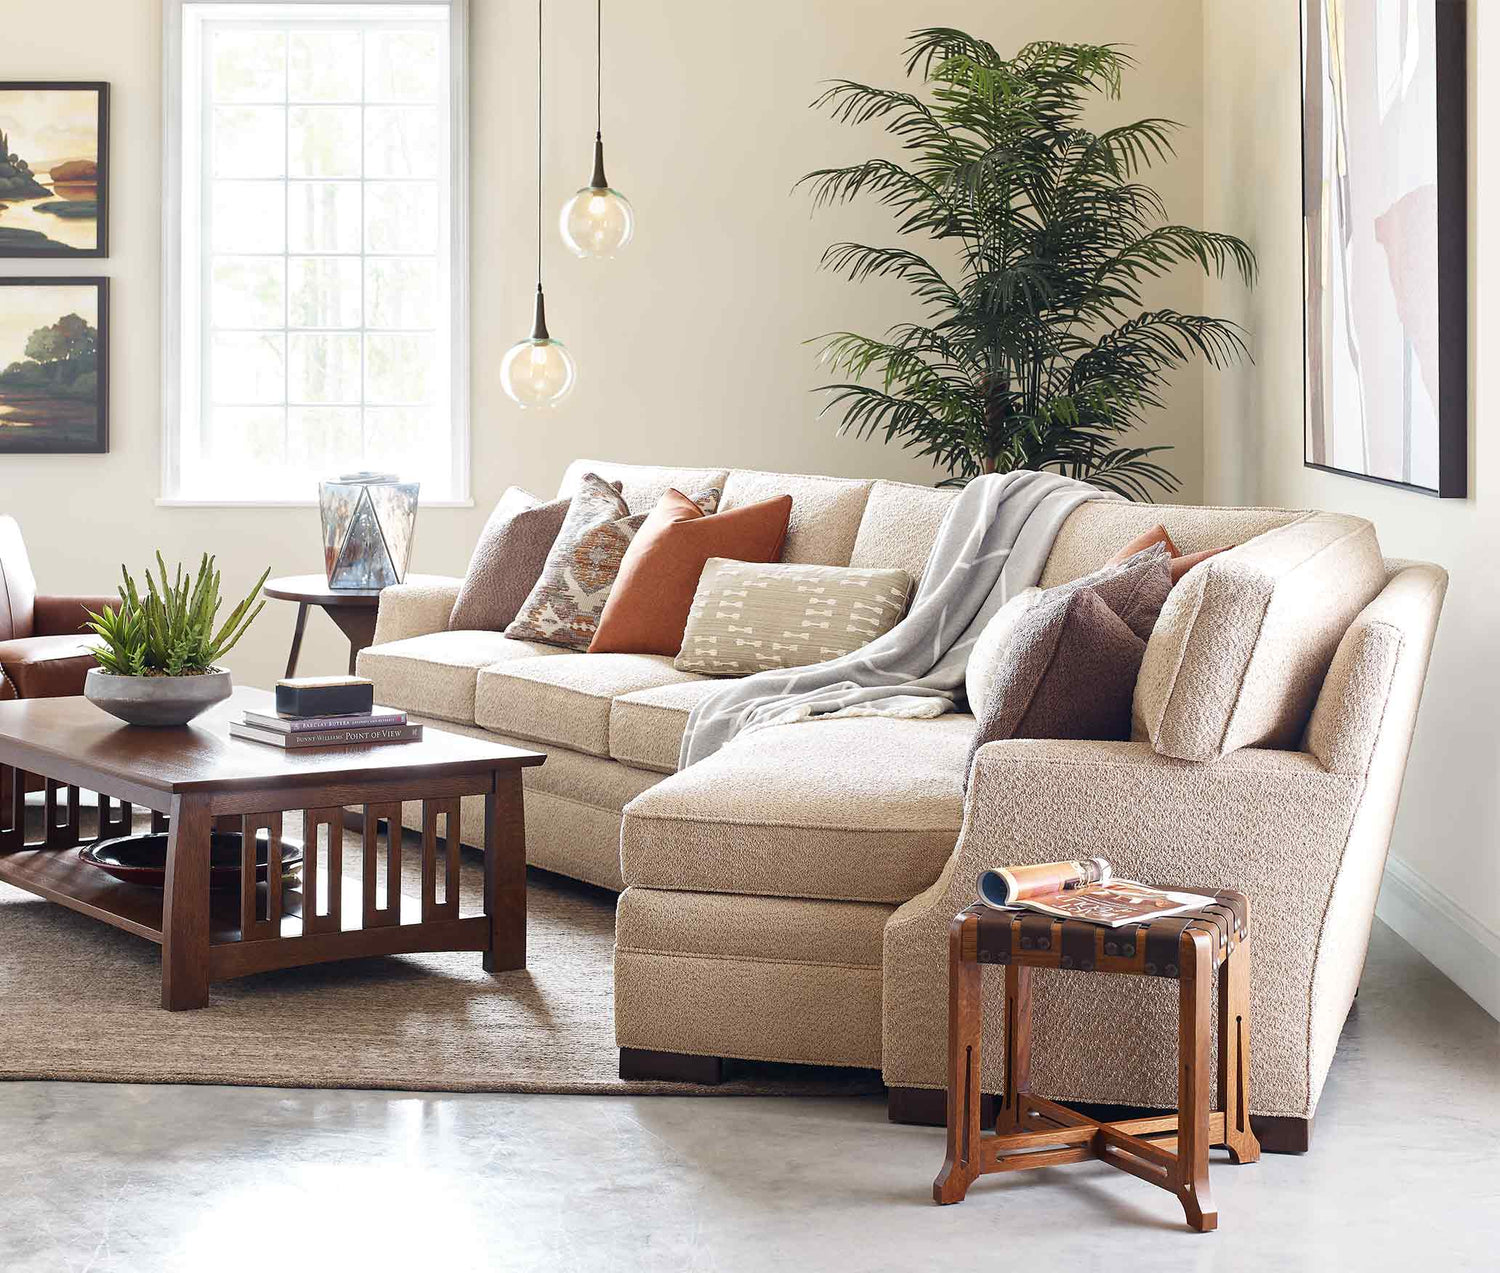 Lifestyle of a Cuddler shaped 7000 Series sectional that is light tan fabric. It has many accent pillows, and a throw blanket draped over the back of the sectional. There is a large fern behind the sectional against the white cream walls